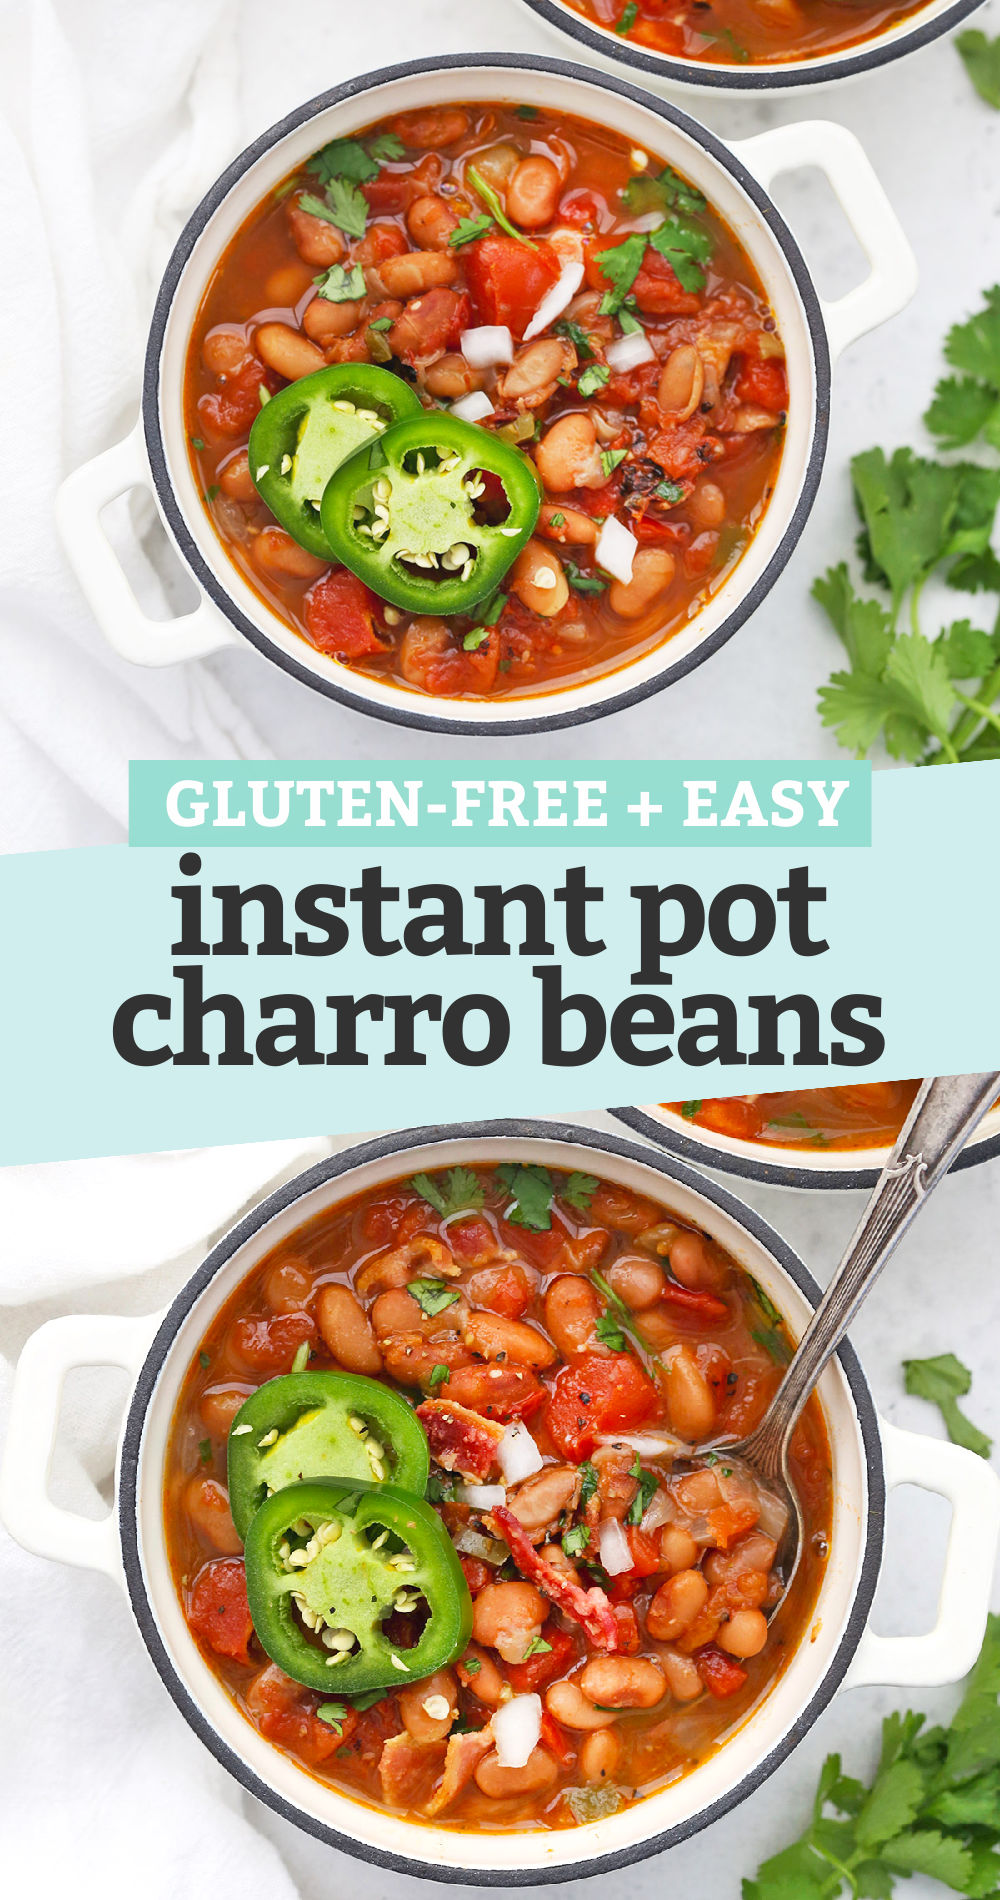 Collage of images of bowls of Instant Pot Charro Beans with text overlay that reads "Gluten-Free + Easy Instant Pot Charro Beans"